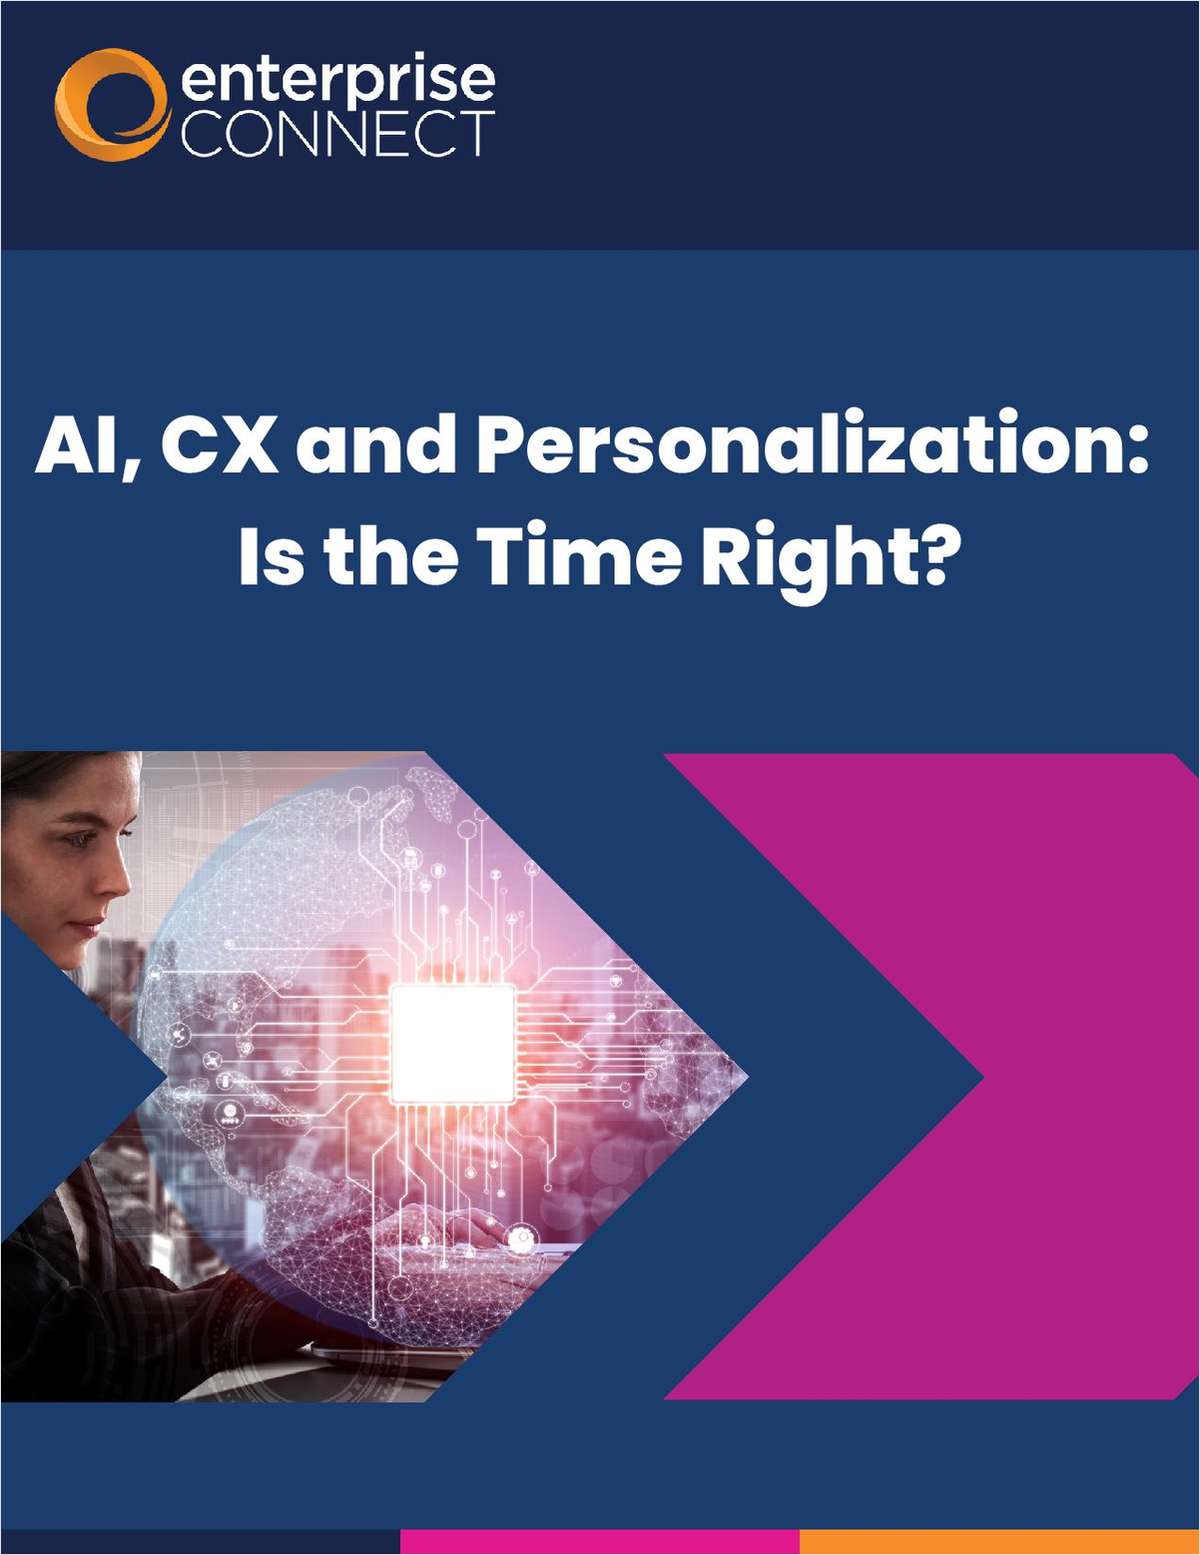 AI, CX and Personalization: Is the Time Right?